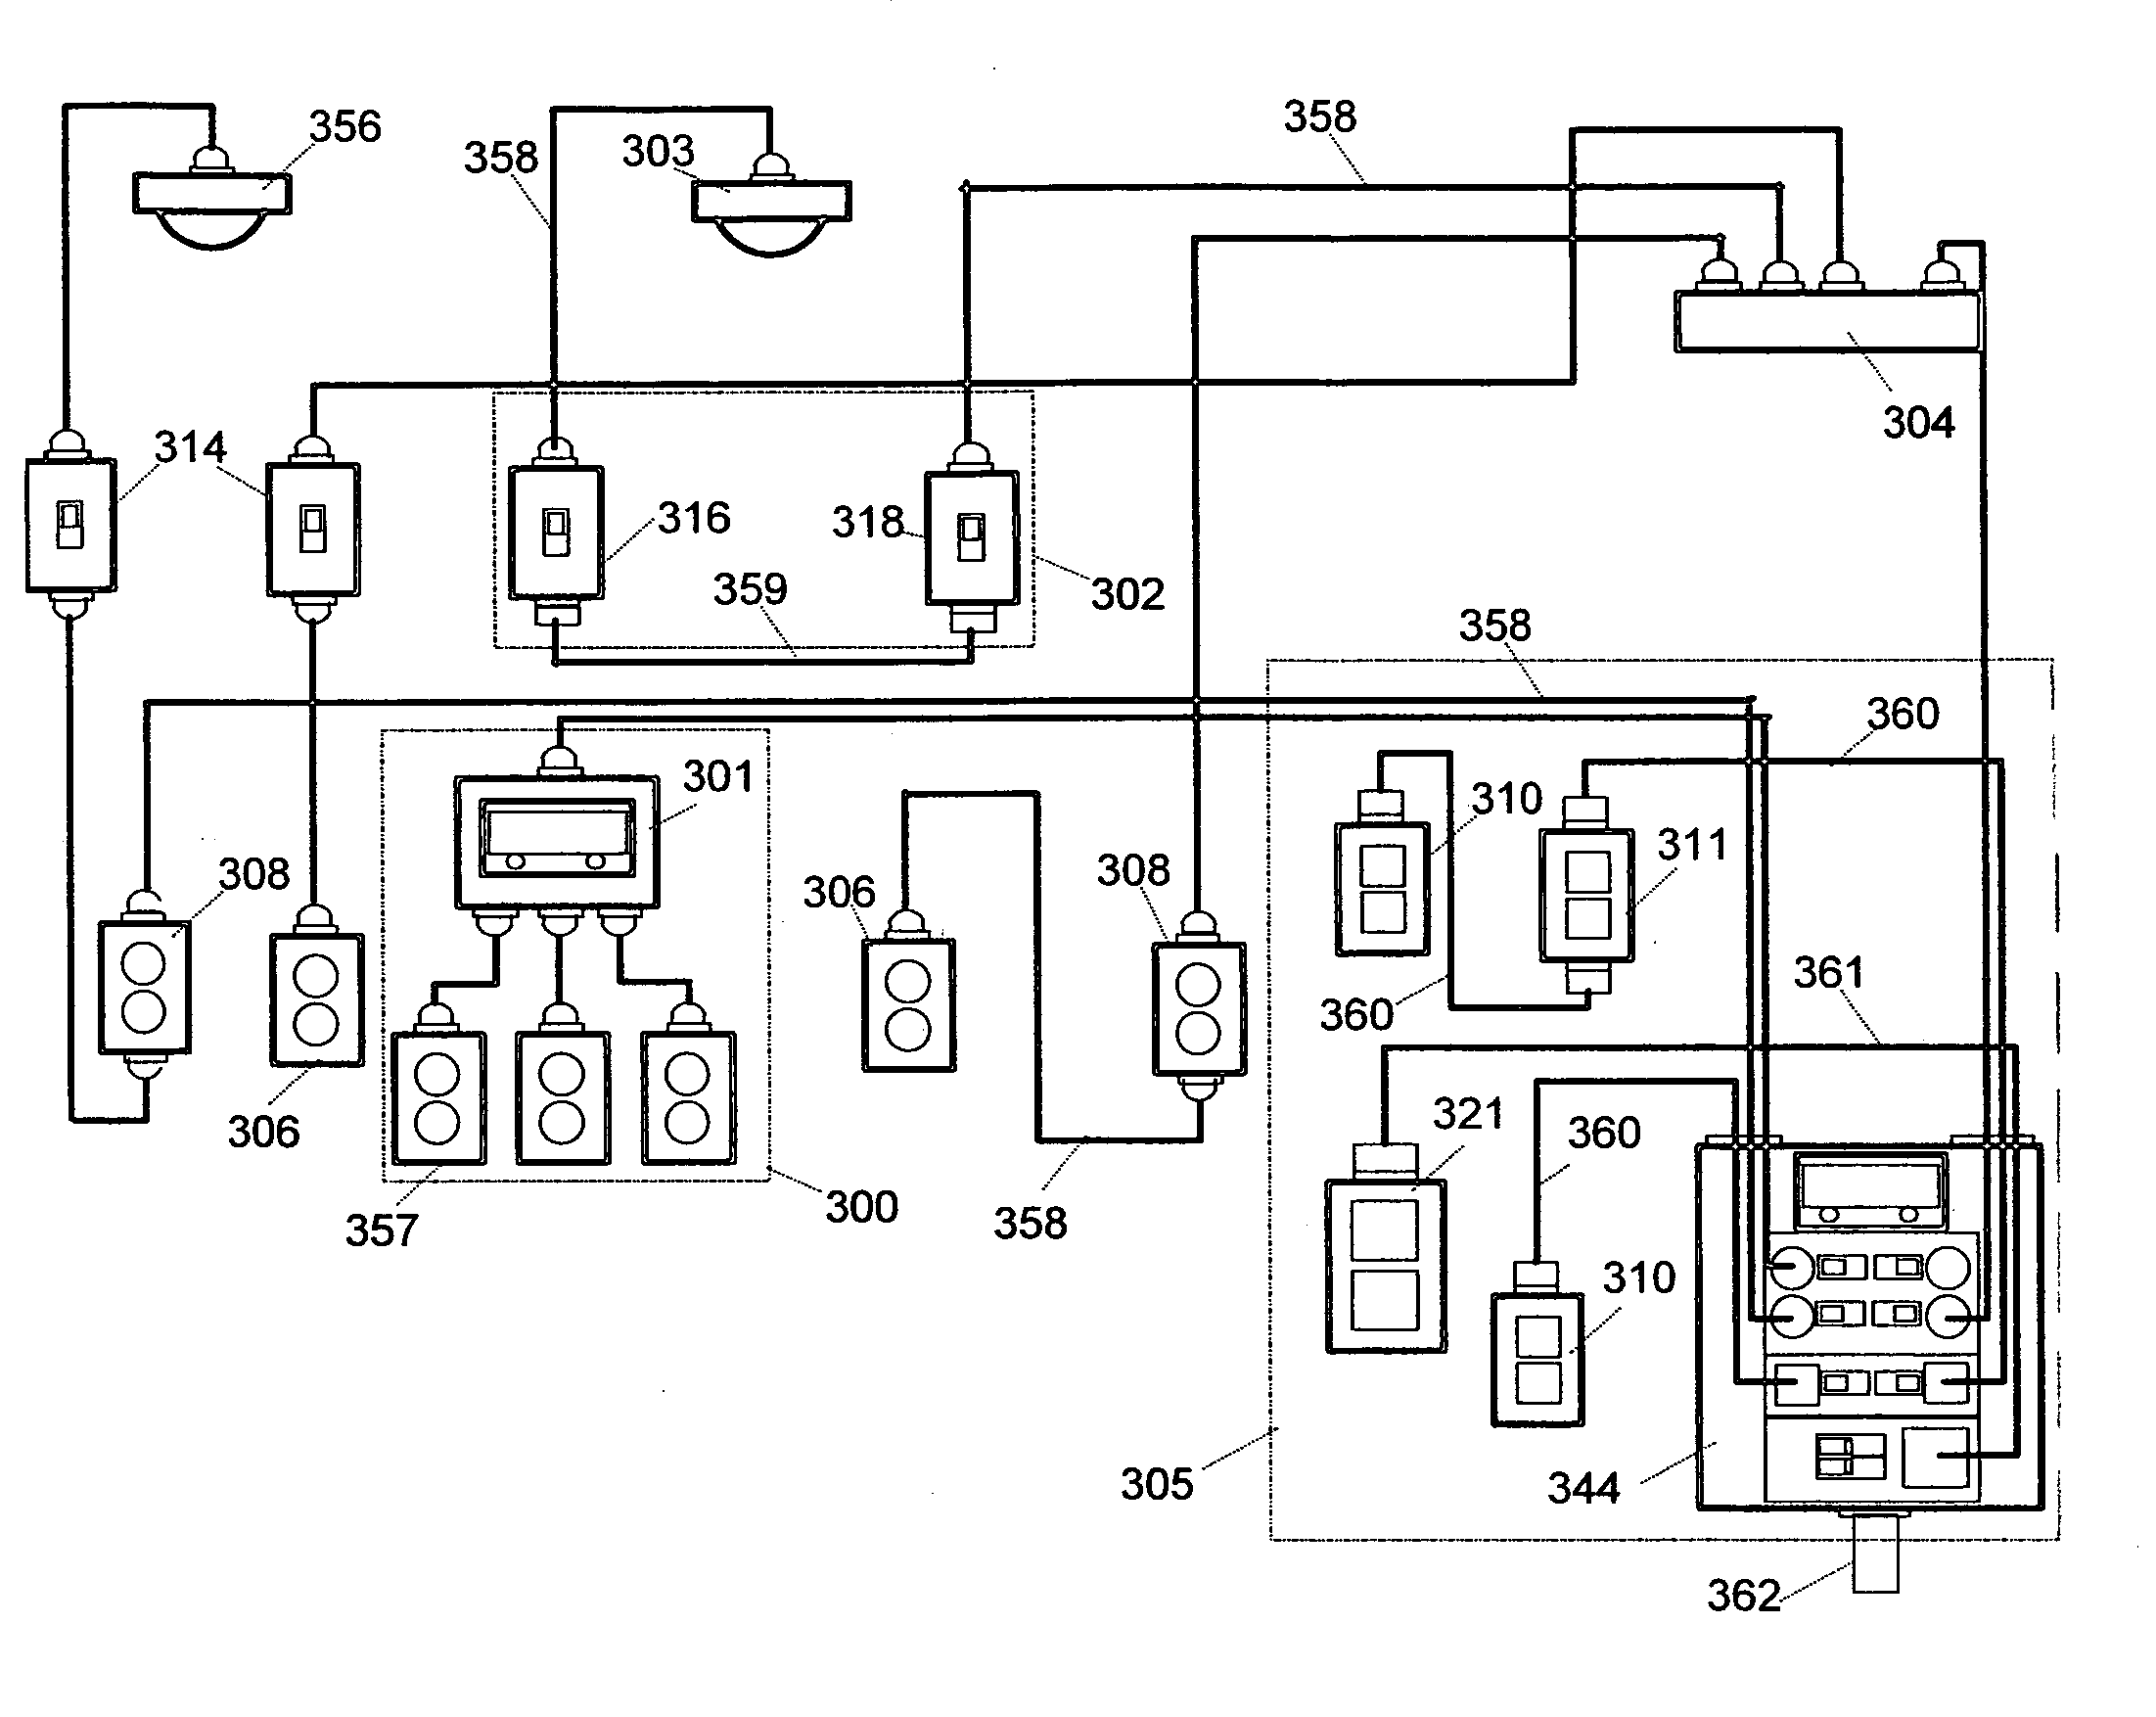 Modular power distribution and control system